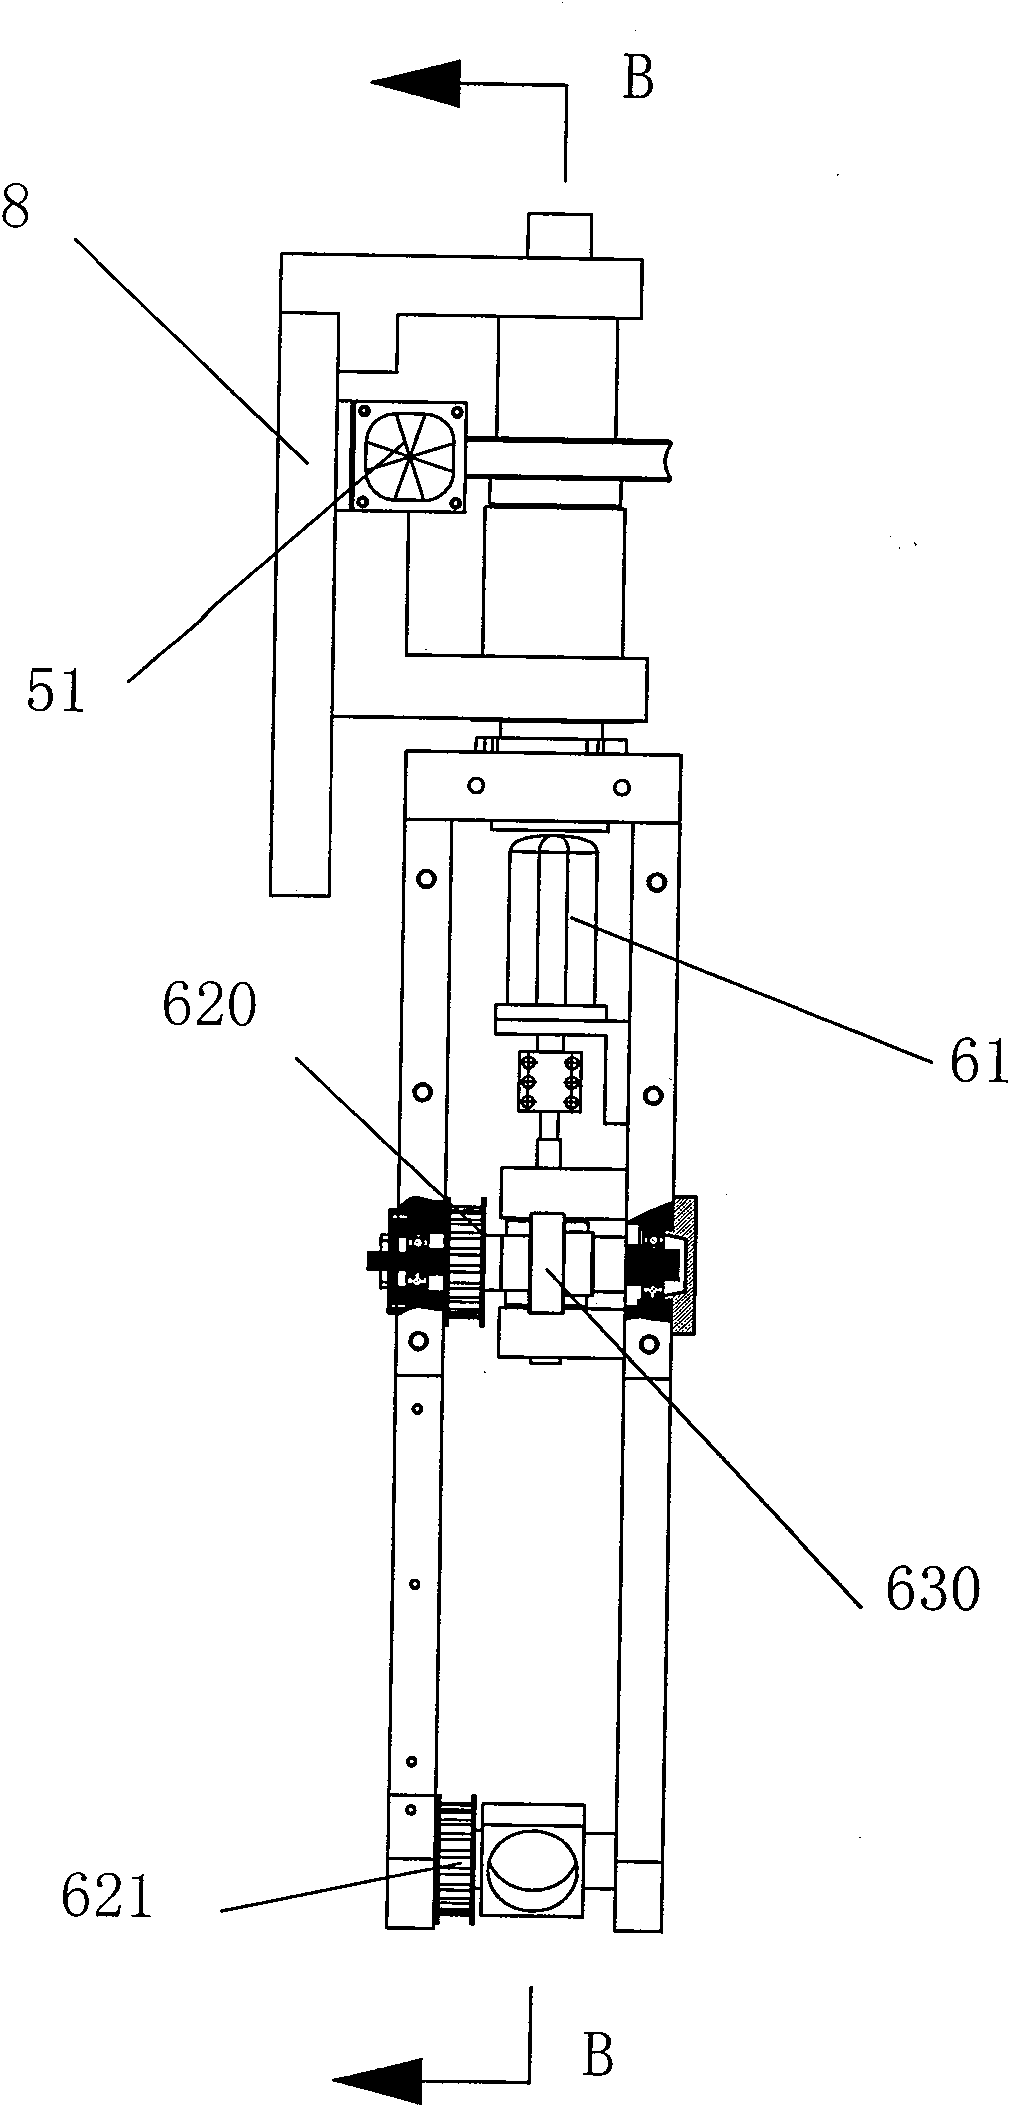 5-shaft linkage numerical control bonding machine and welding process control method thereof